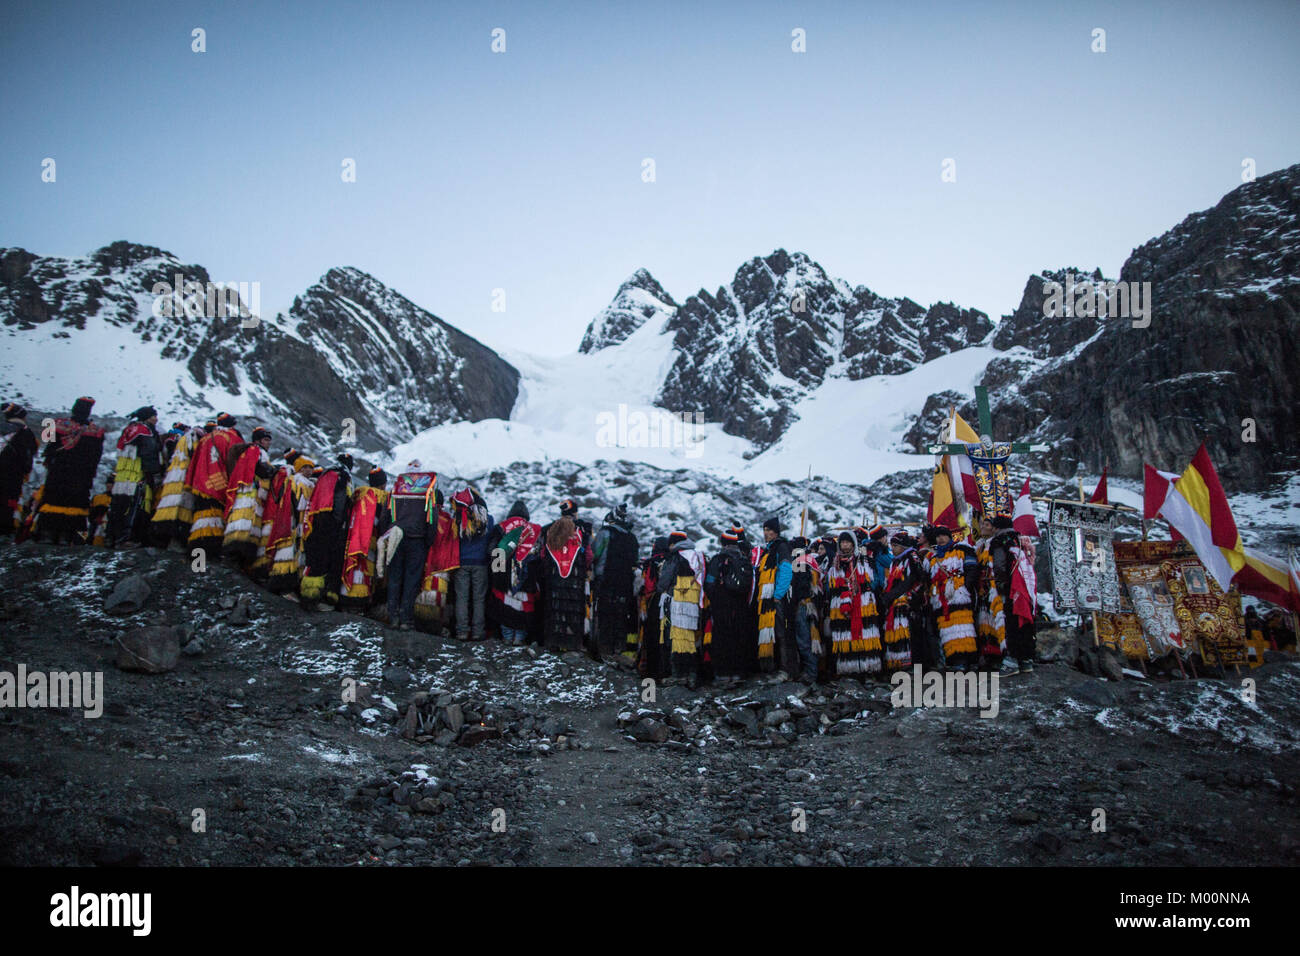 Cusco, Peru. 29th Dec, 2017. Members of the Nation Acomayo ascend to Ausangate Mountain, at 6362m, the snow covered has been affected by the climate change, years ago this area was covered by snow.Quyllur Rit'i or Star Snow Festival is a spiritual and religious festival held Annually at the Sinakara Valley in the Cusco Region of Peru. Groups of Quero indigenous people climb Ausangate Mountain, at 6362m, in search of the Snow Star Which is reputedly buried Within the mountain.According to the chroniclers, the Qoyllur Rit'i is the Christ that the Church sent painted on a rock at almost 5, Stock Photo